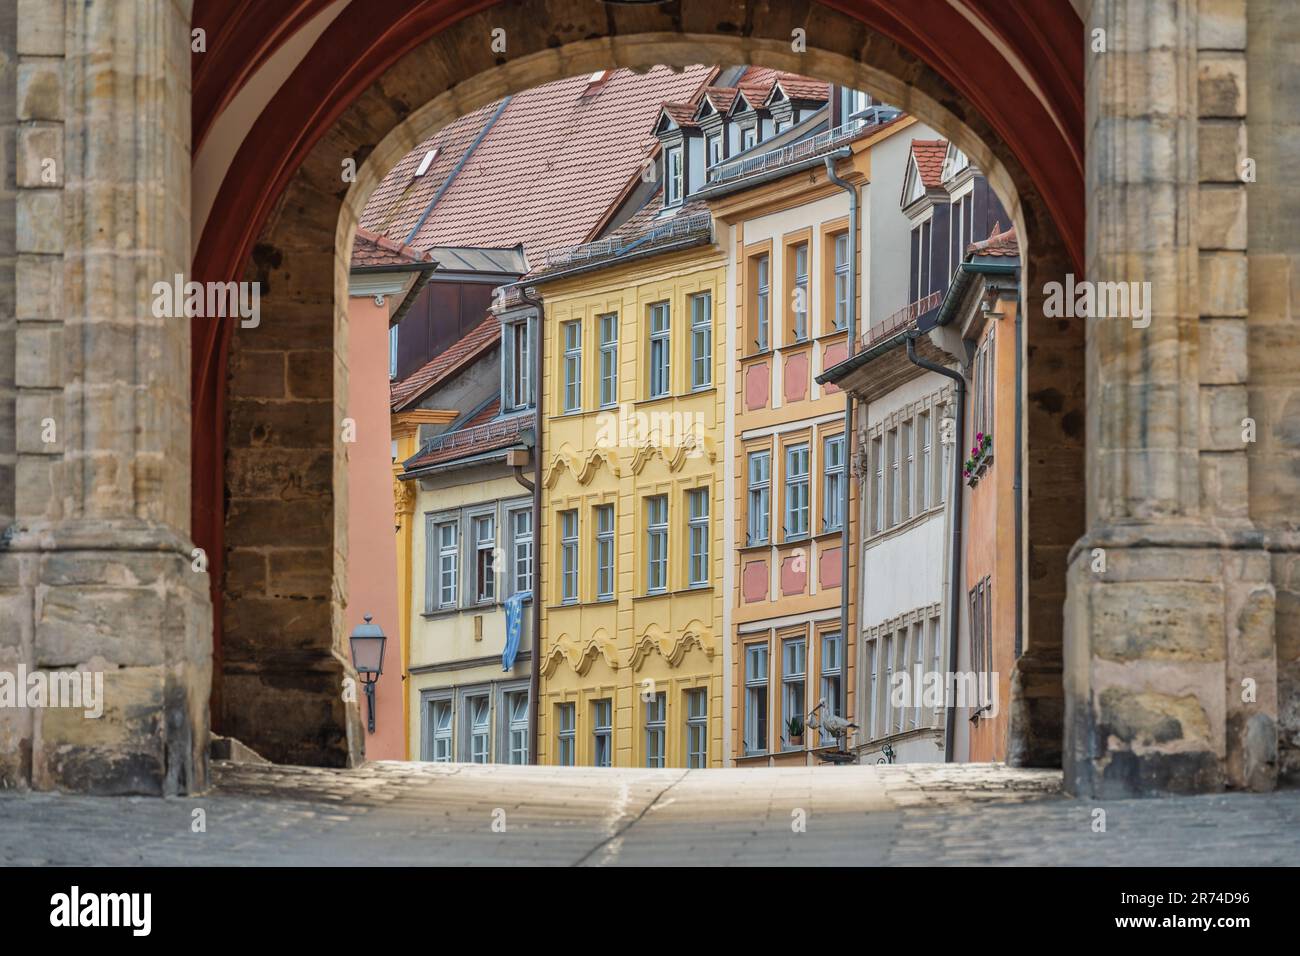 Bamberg Germany, city skyline at Altes Rathaus Old Town Hall Stock Photo